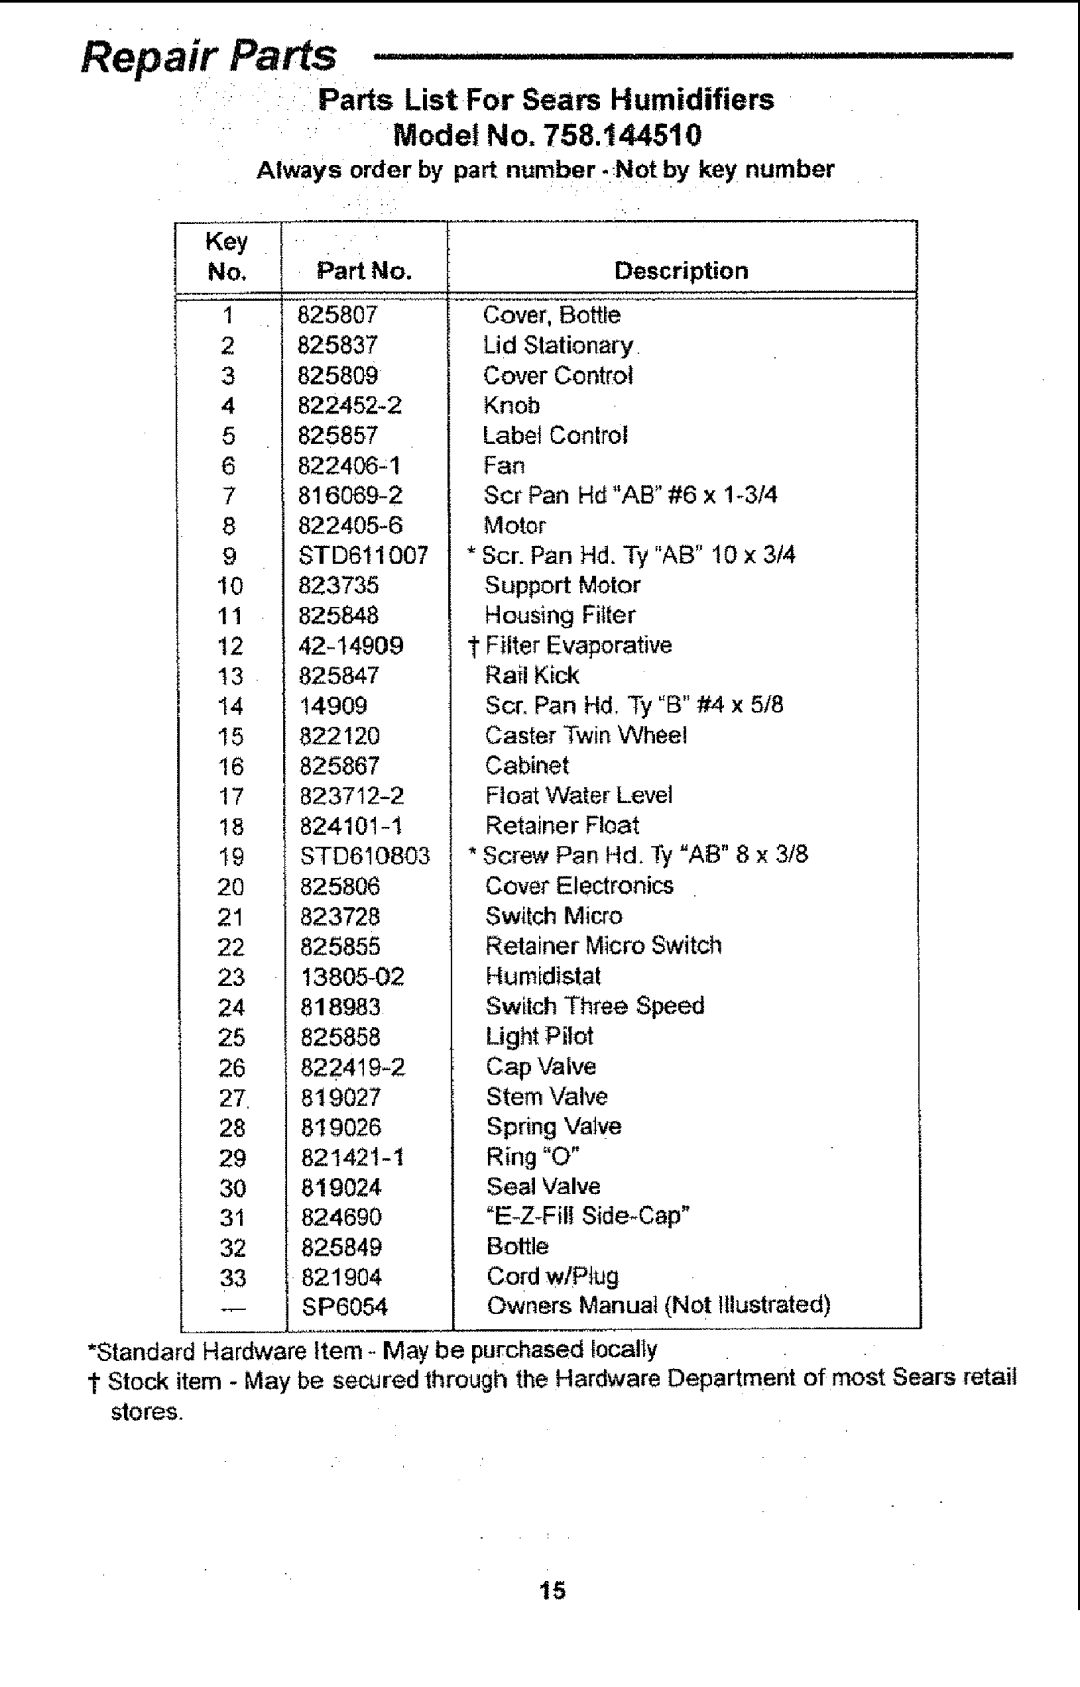 Sears 758.14451 Repair Parts, Parts List For Sears Humidifiers, Model, Always order by part number. Not by key number 